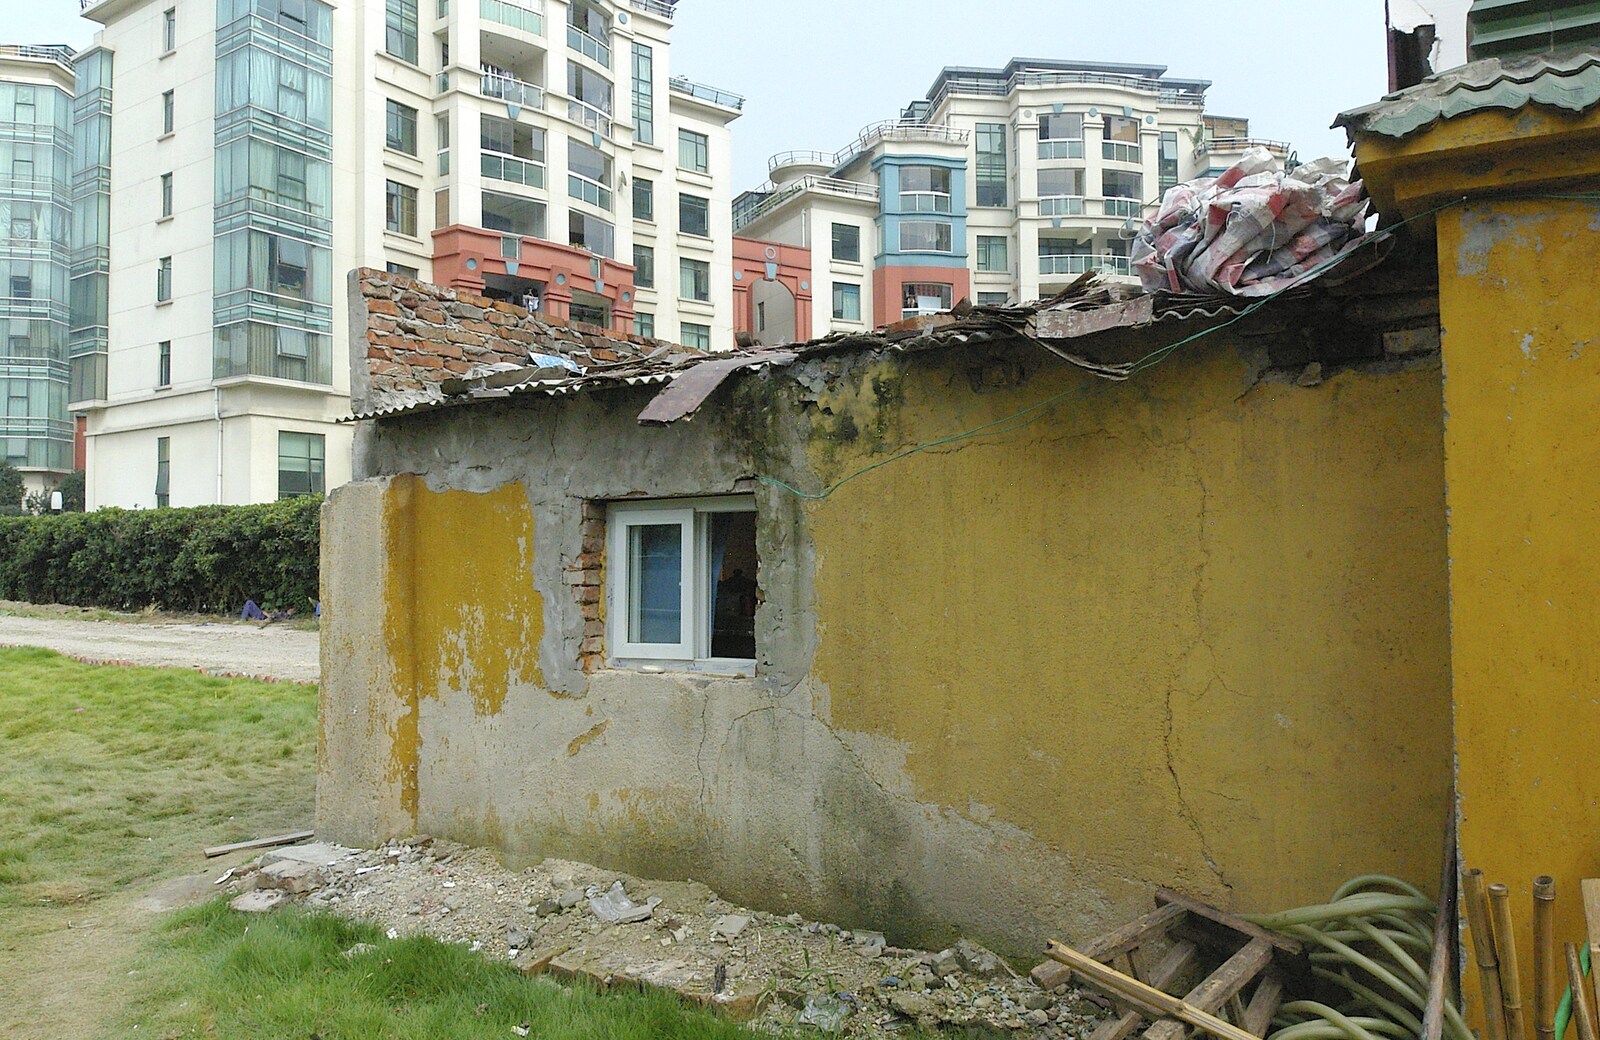 A derelict room from A Few Days in Nanjing, Jiangsu Province, China - 7th October 2006